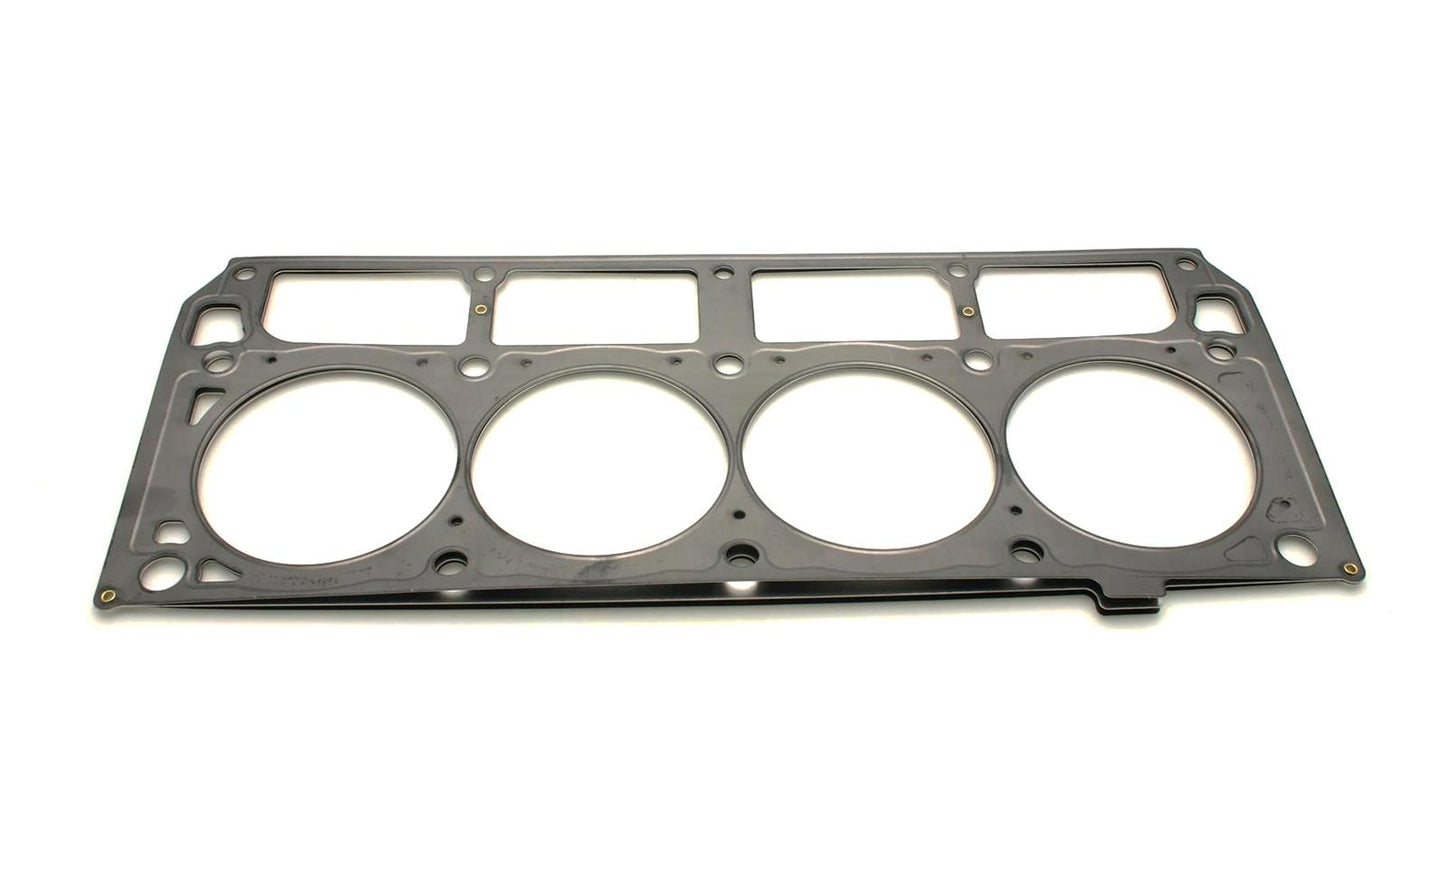 Cometic Head Gasket 4.06 Bore .040 Thickness